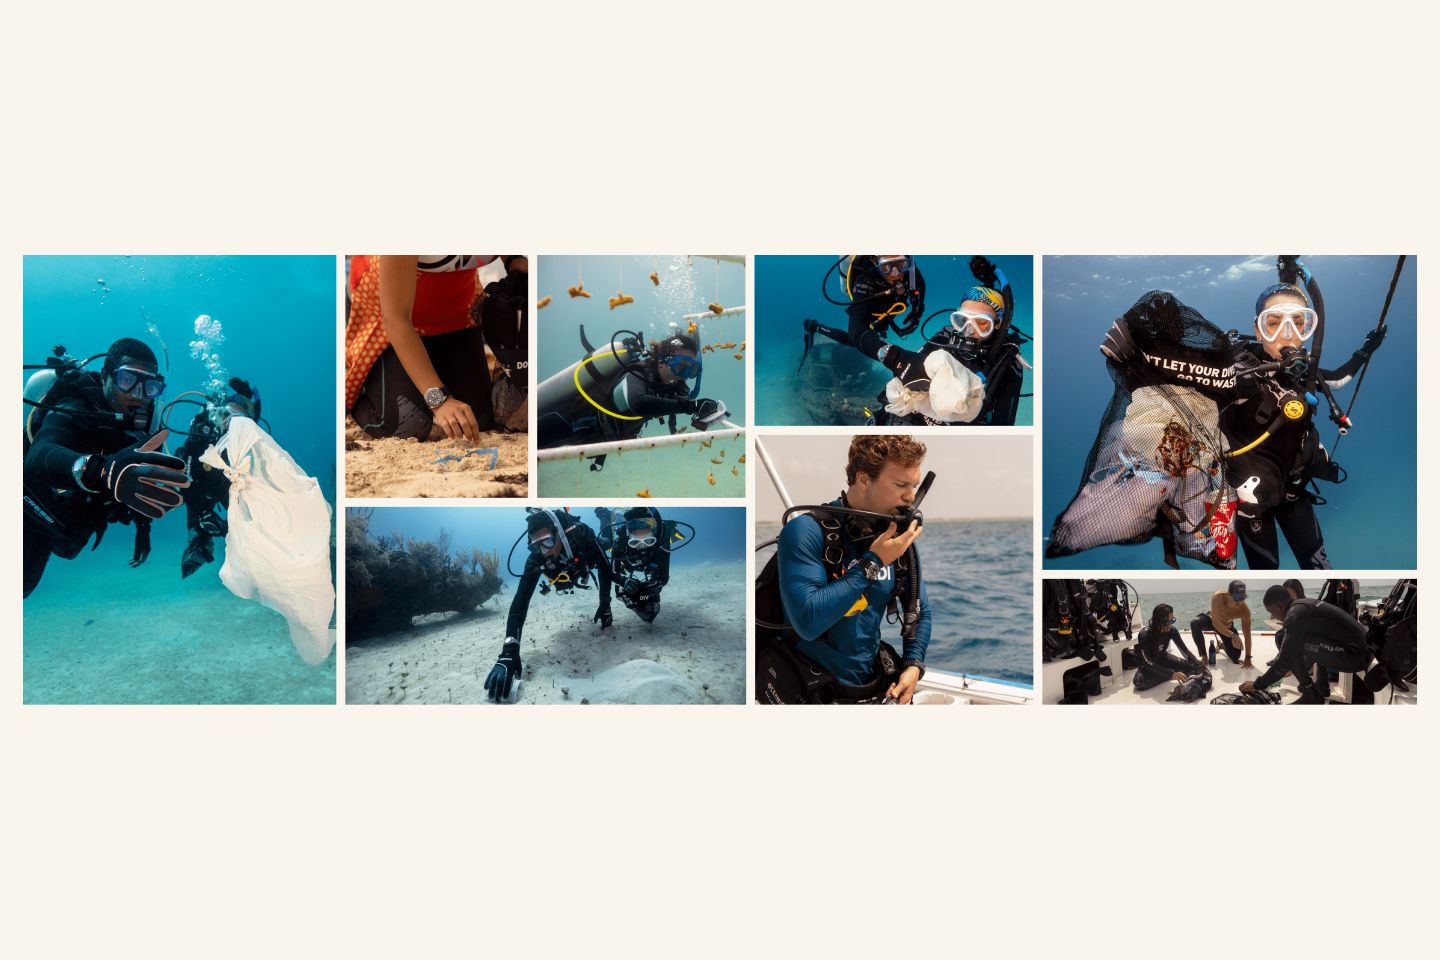 Seiko's commitment to ocean conservation and exploration is very strong.